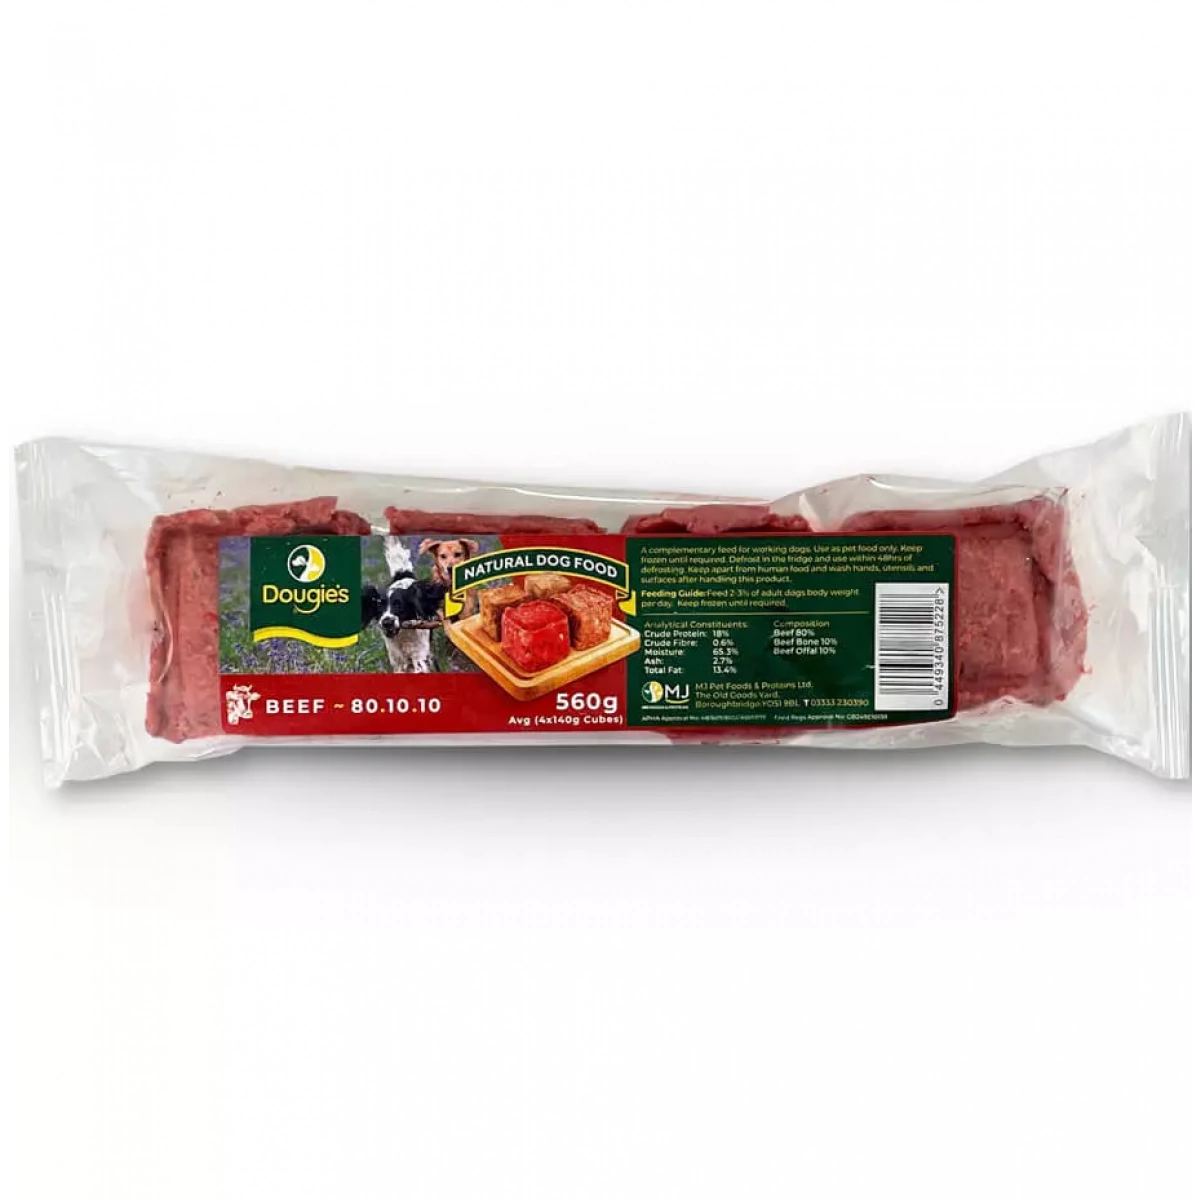 Dougie’s 80/10/10 – Beef 140g – Pawfect Supplies Ltd Product Image